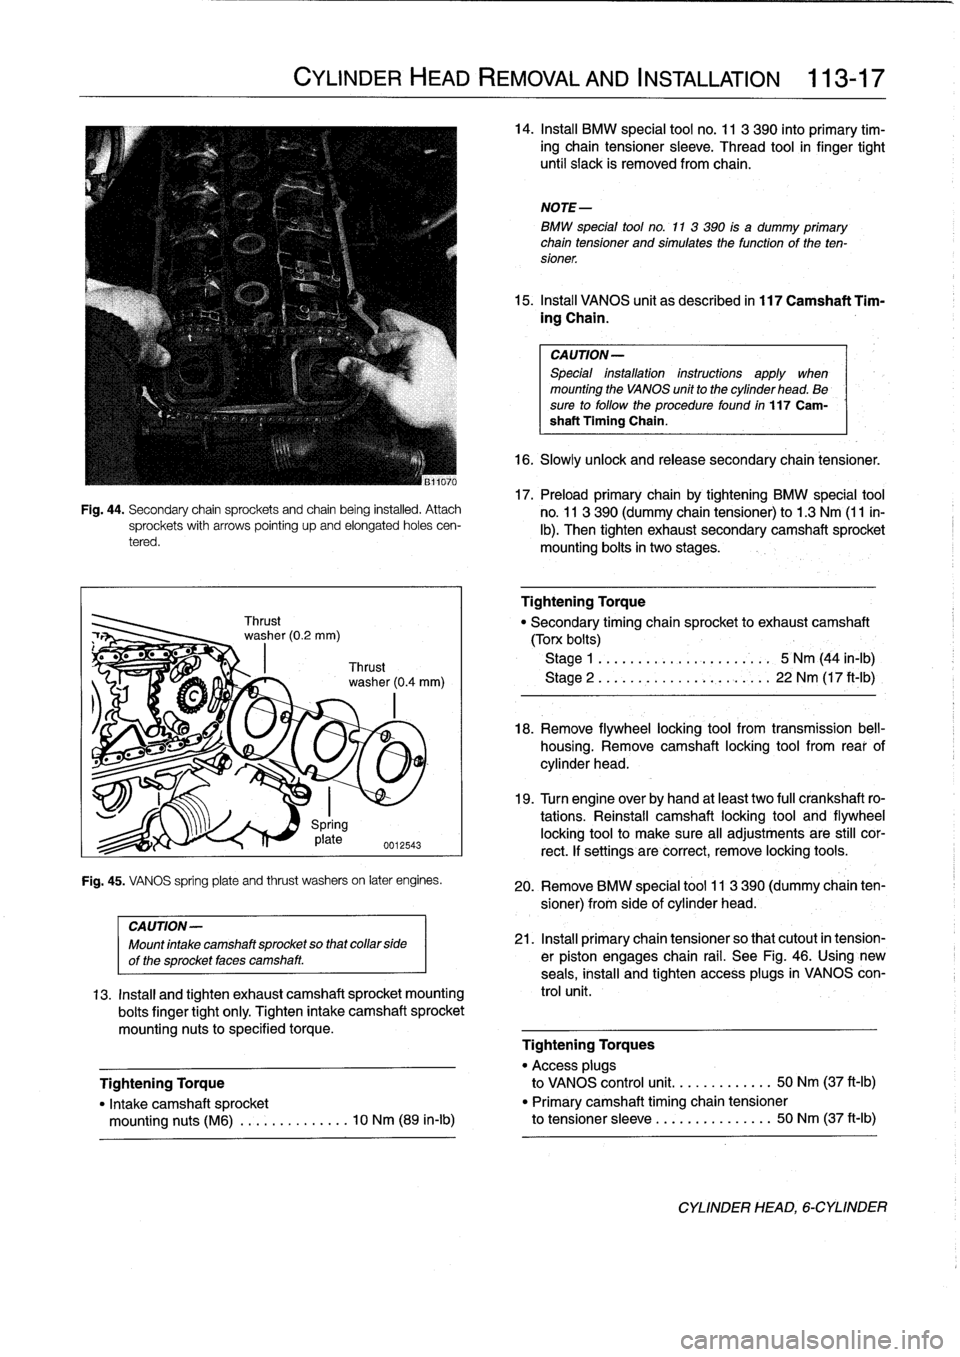 BMW 318i 1998 E36 Workshop Manual 
Fig
.
44
.
Secondary
chain
sprockets
and
chain
being
installed
.
Attachsprockets
with
arrows
pointing
upand
elongated
holes
cen-
tered
.

CYLINDER
HEAD
REMOVAL
AND
INSTALLATION

	

113-17

Spring
17
